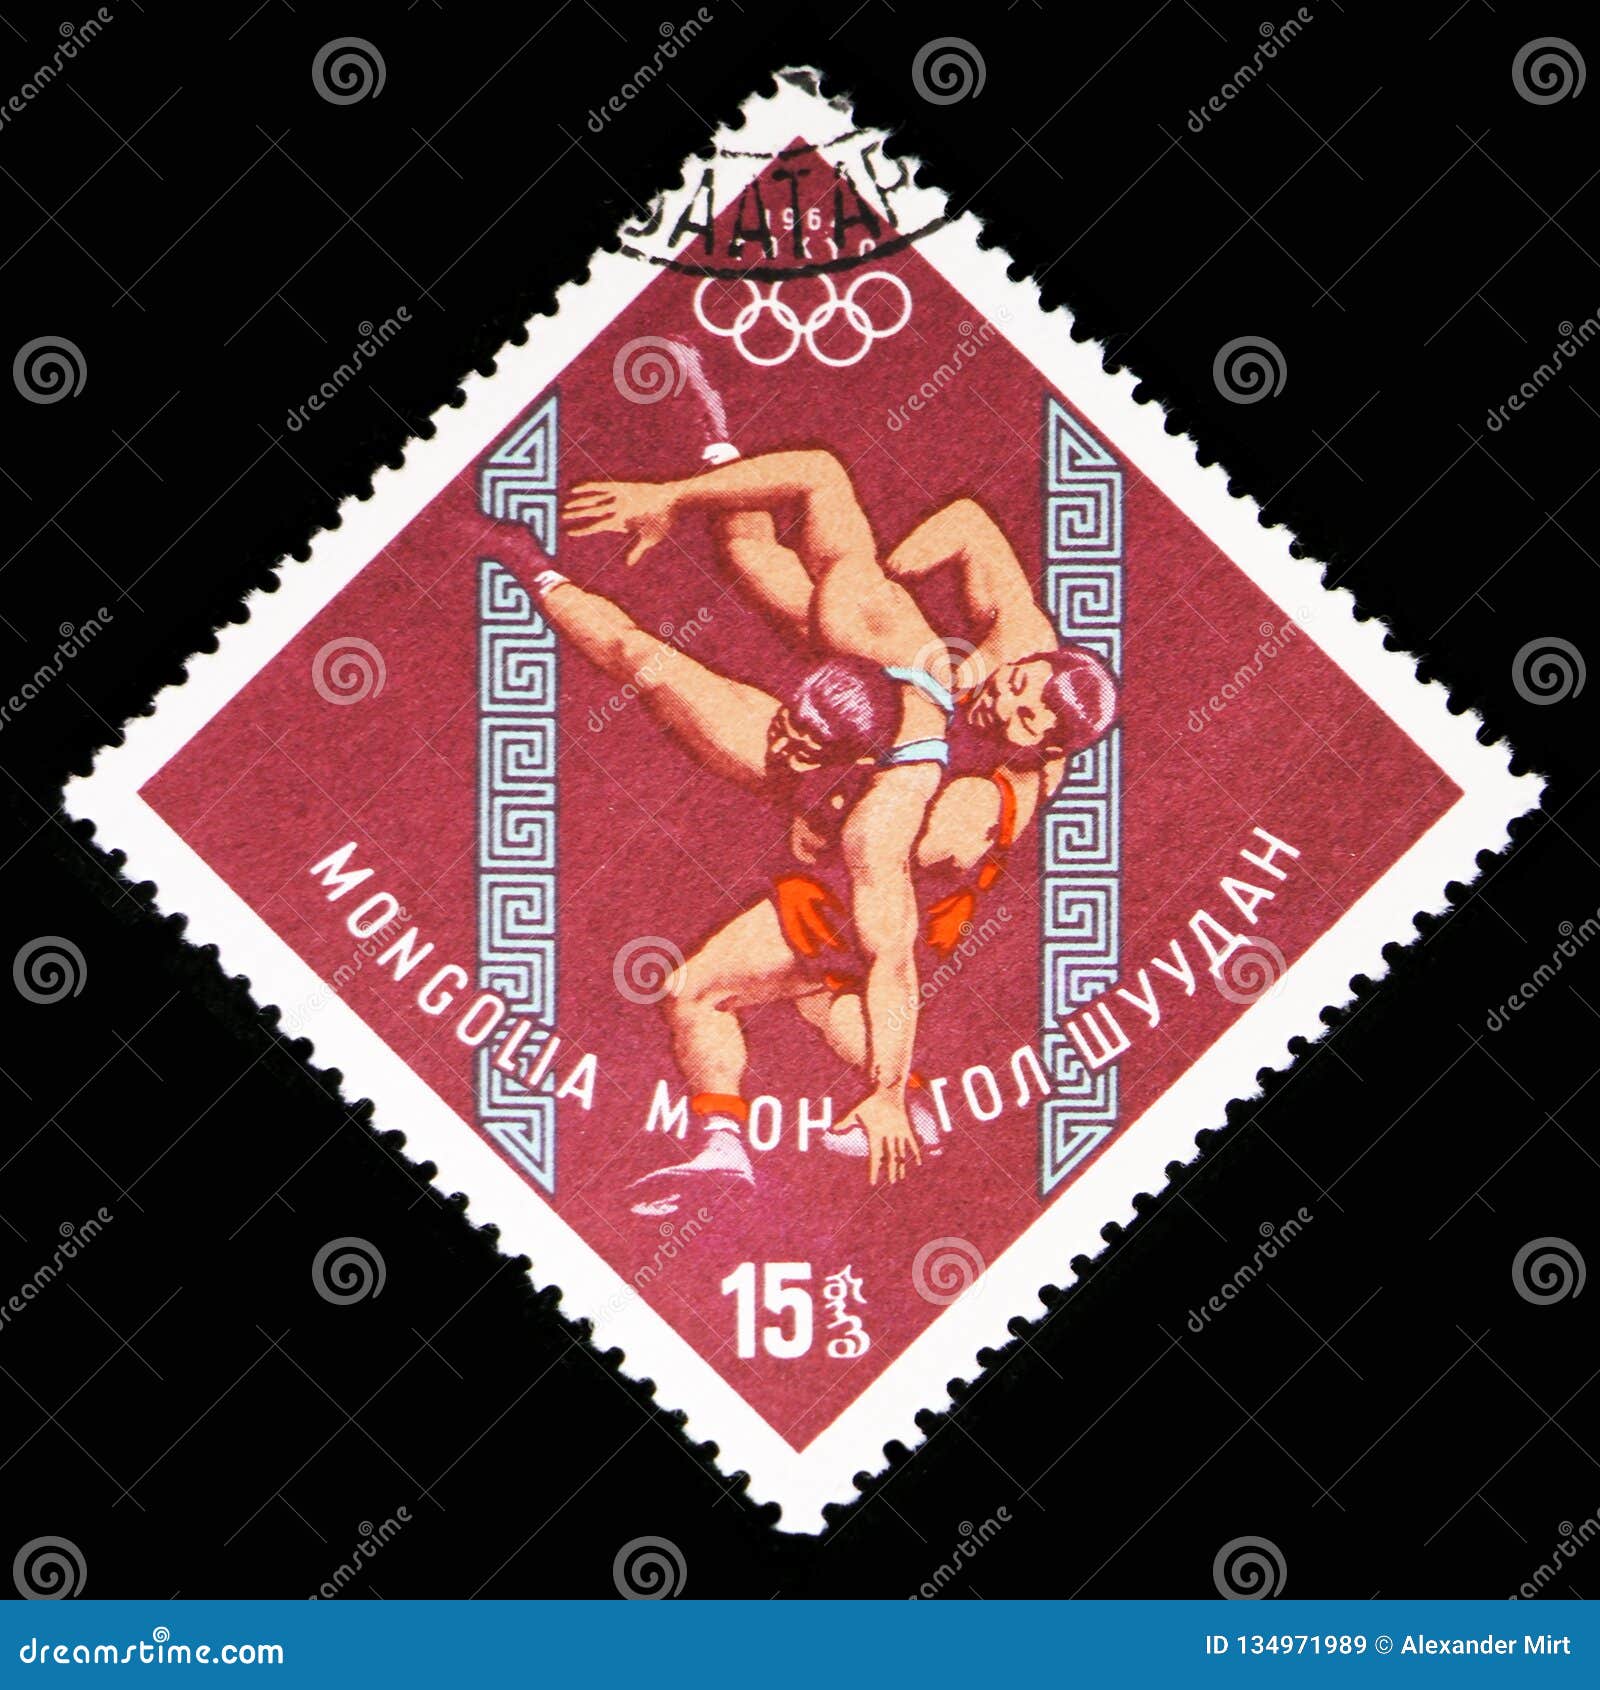 Wrestling Summer Olympics 1964 Tokyo Serie Circa 1964 Editorial Stock Image Image Of Heritage Stamp 134971989